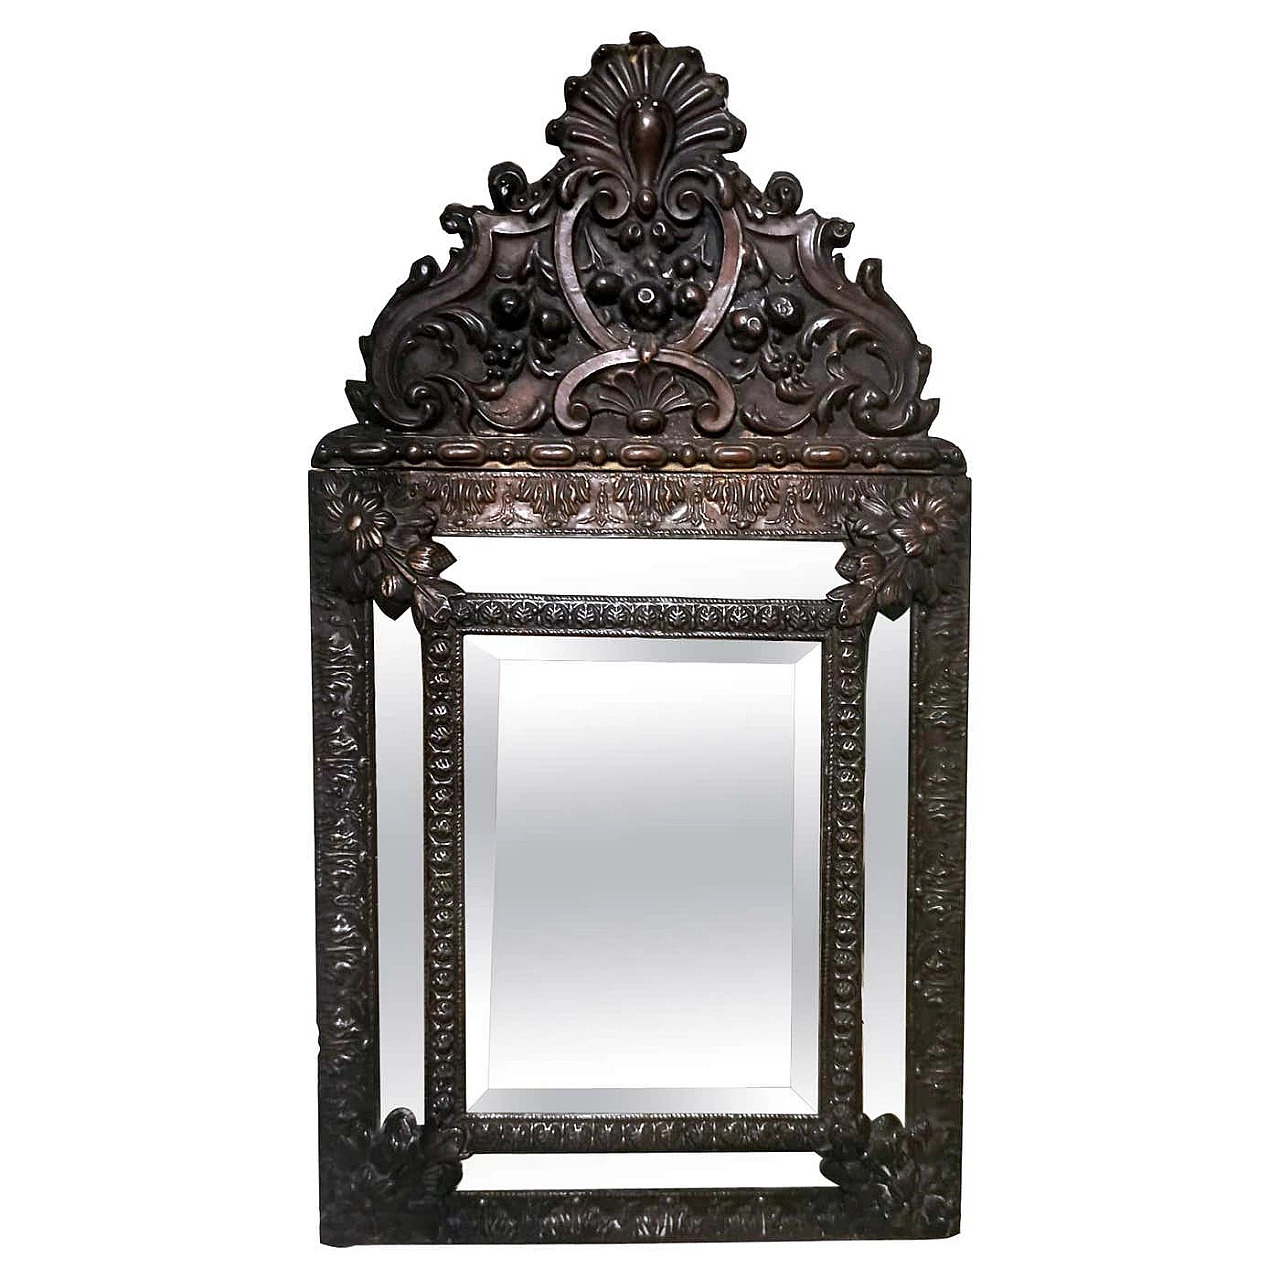 Napoleon III style wall mirror with repoussé work in burnished brass, mid-19th century 16